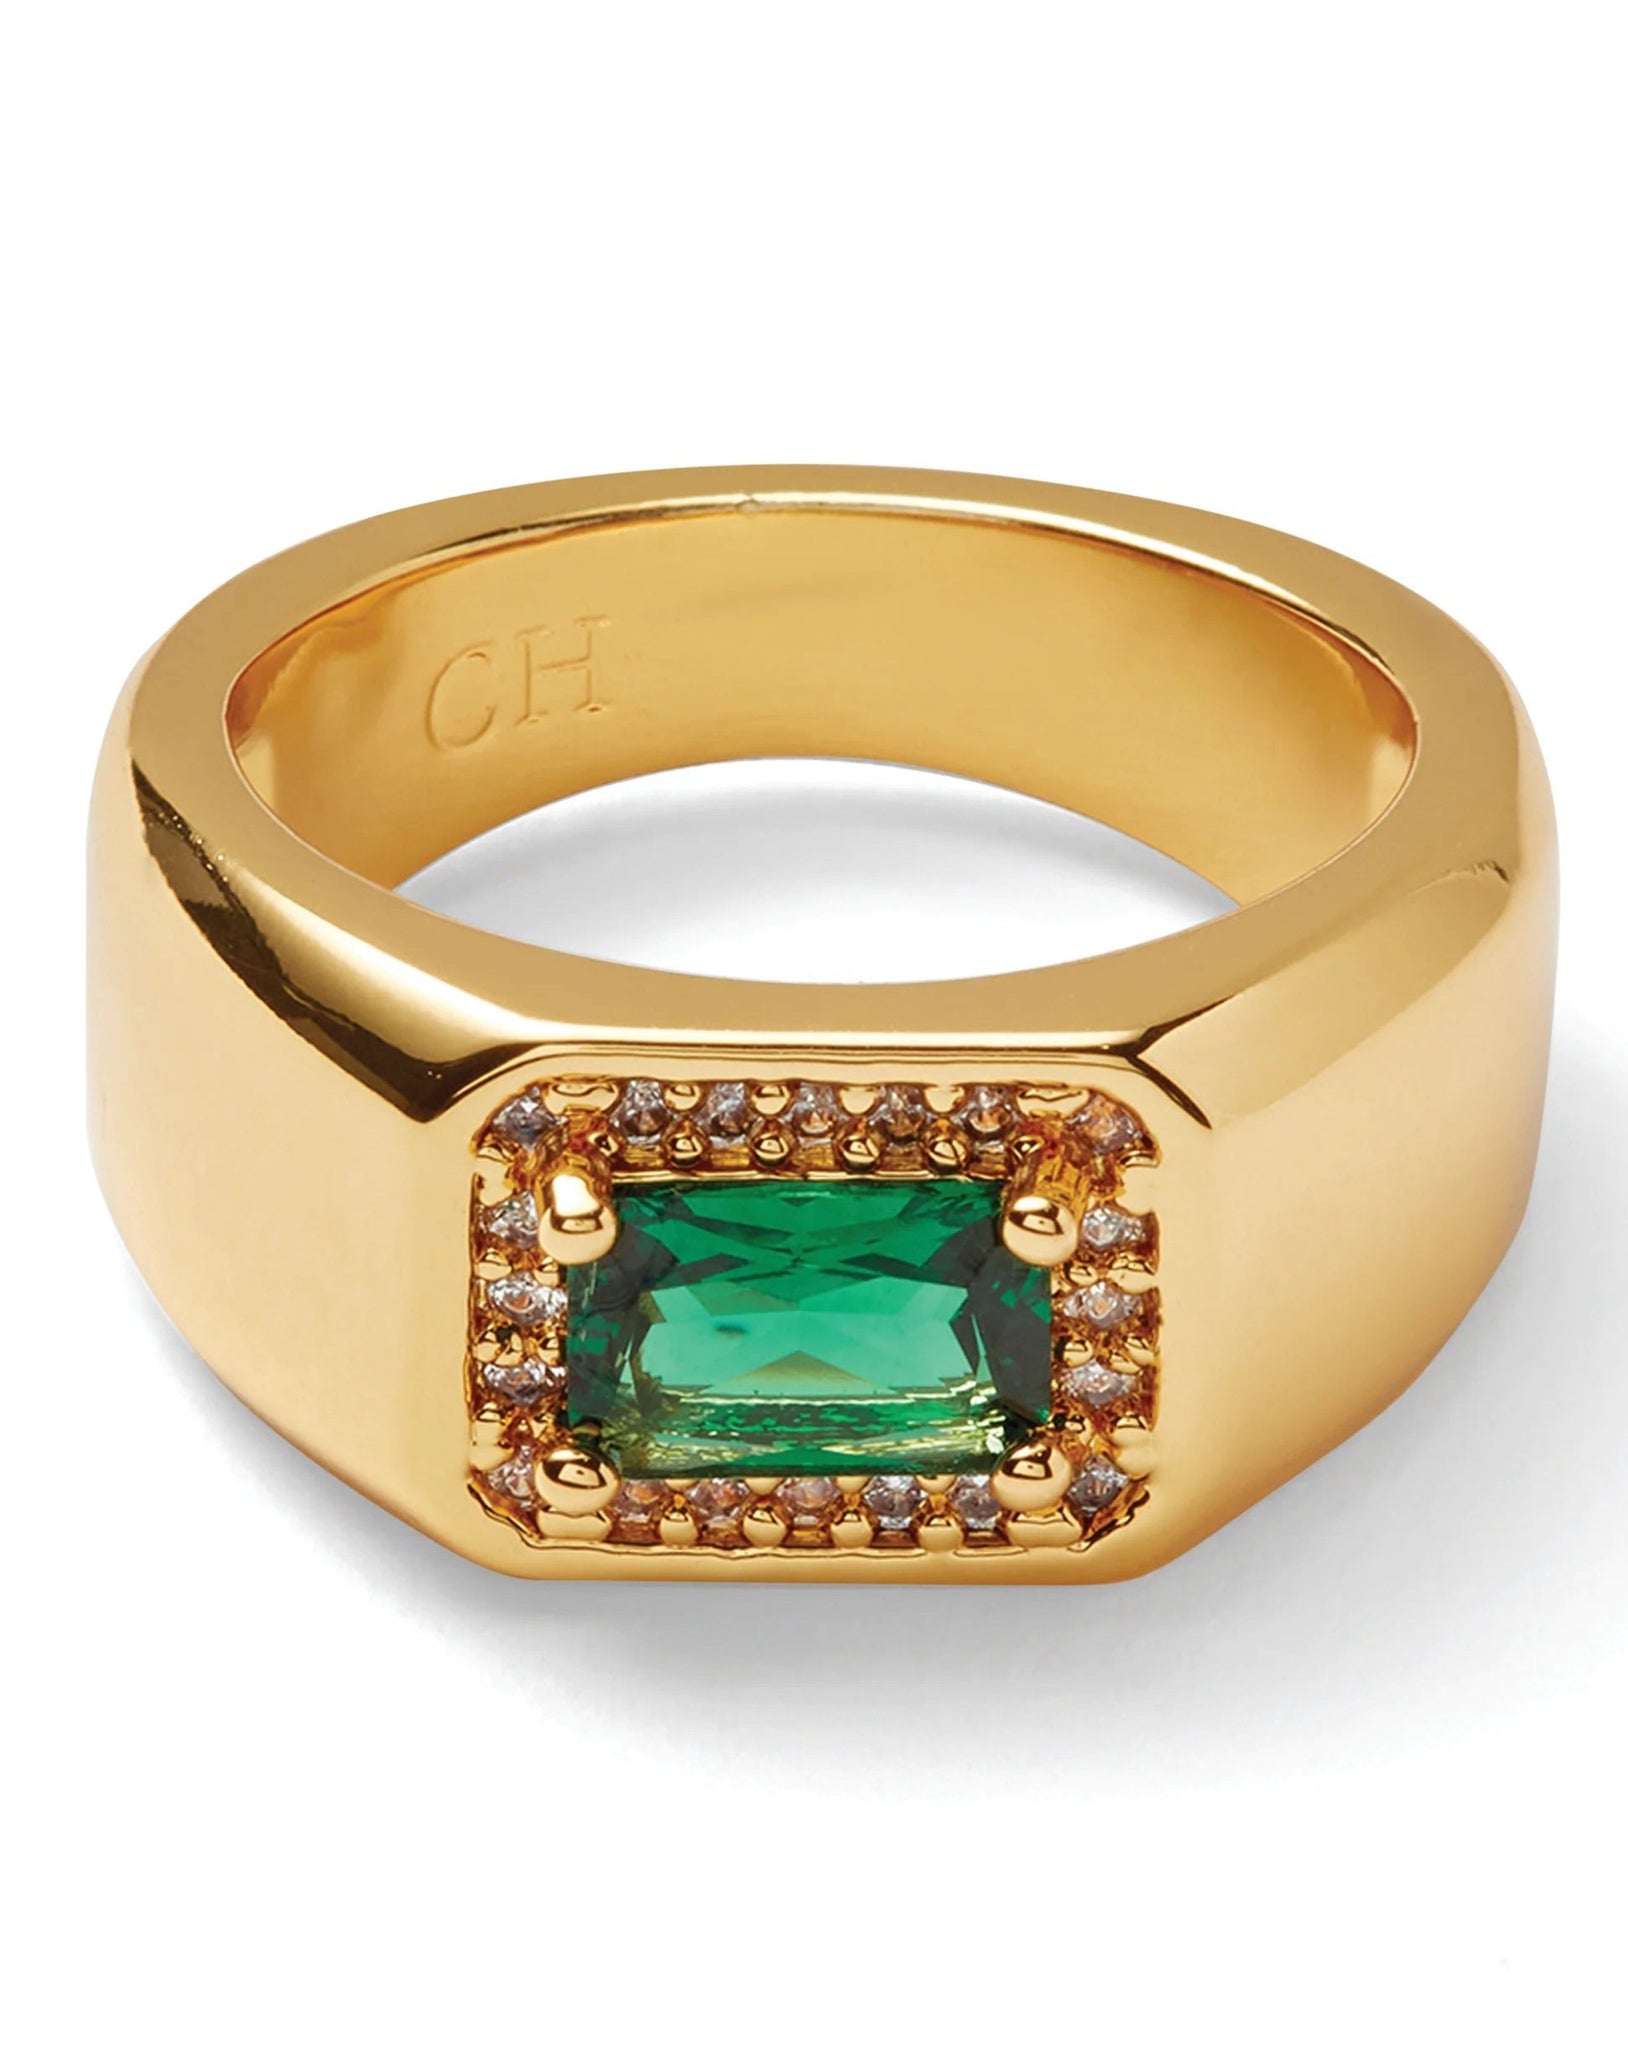 Emerald ring by Crystal Haze